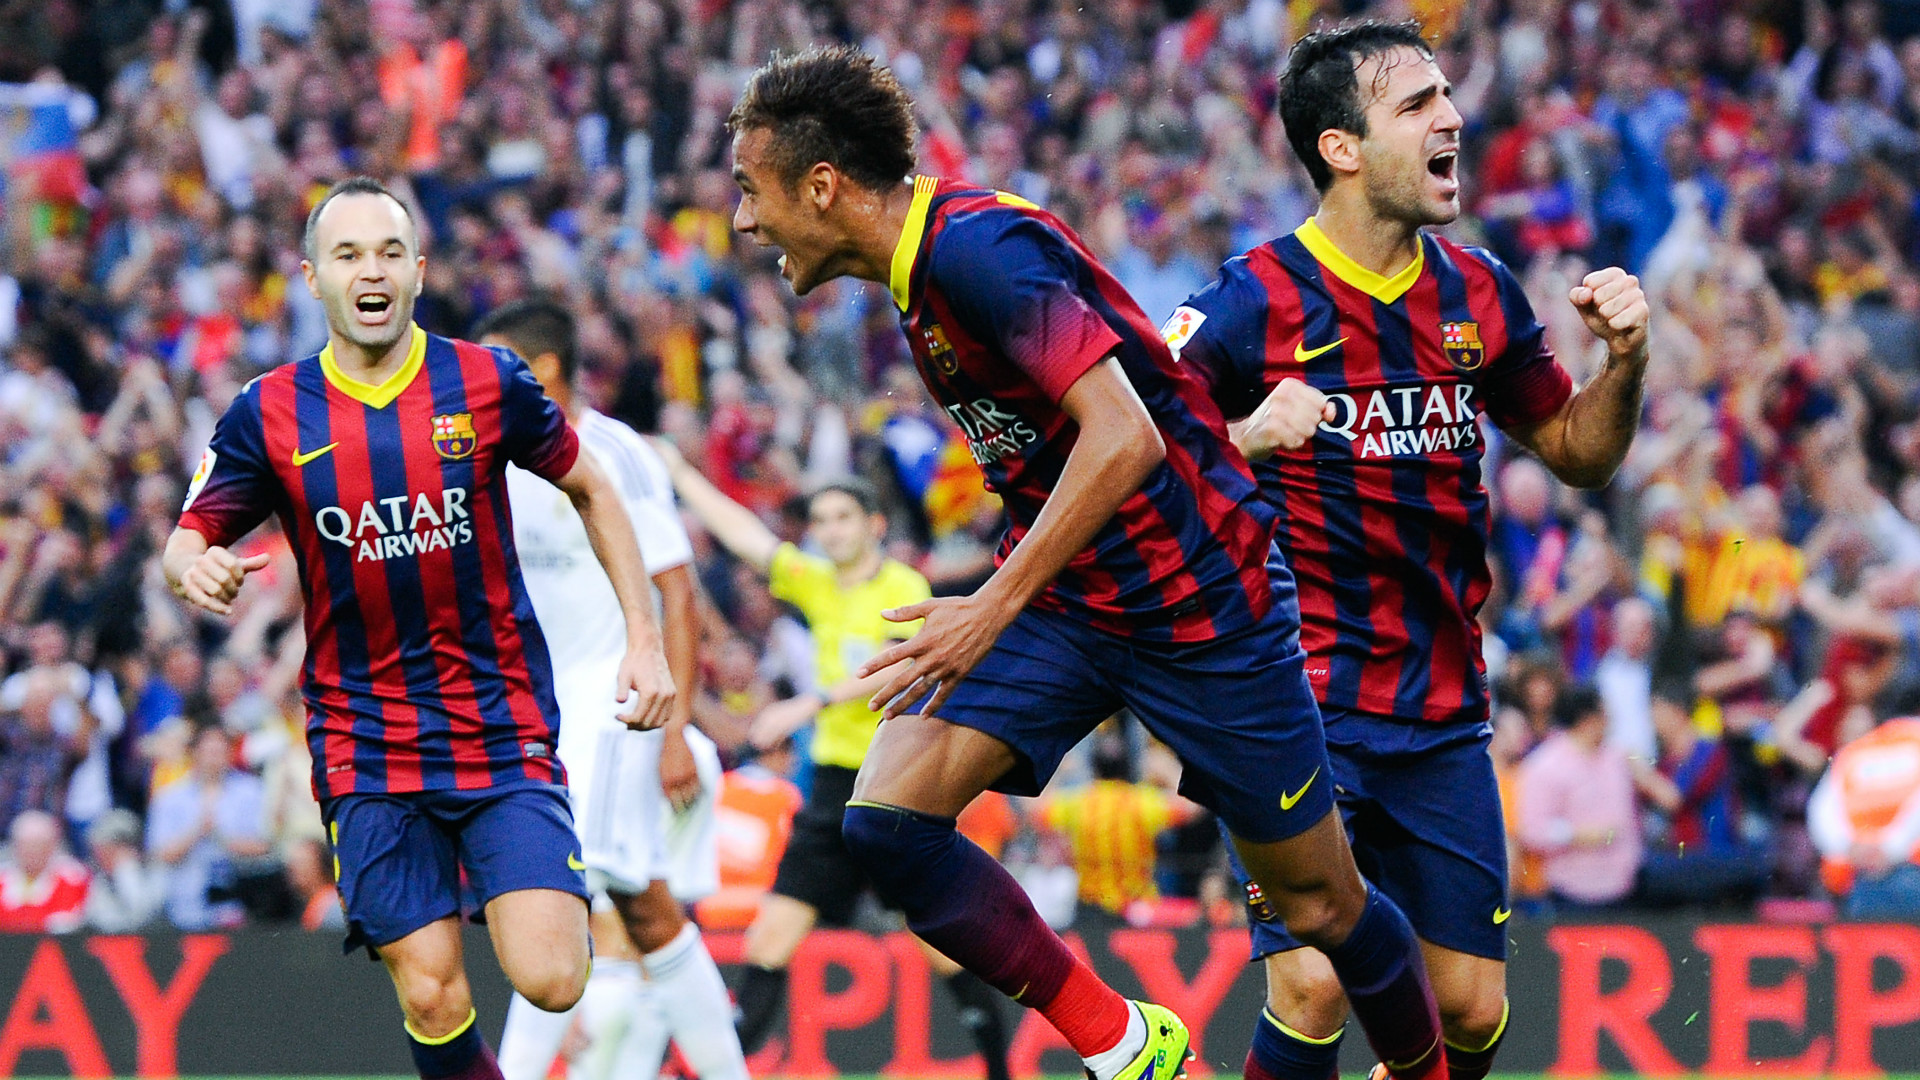 Neymar's debut for Barcelona - Who were his teammates and where are they now?